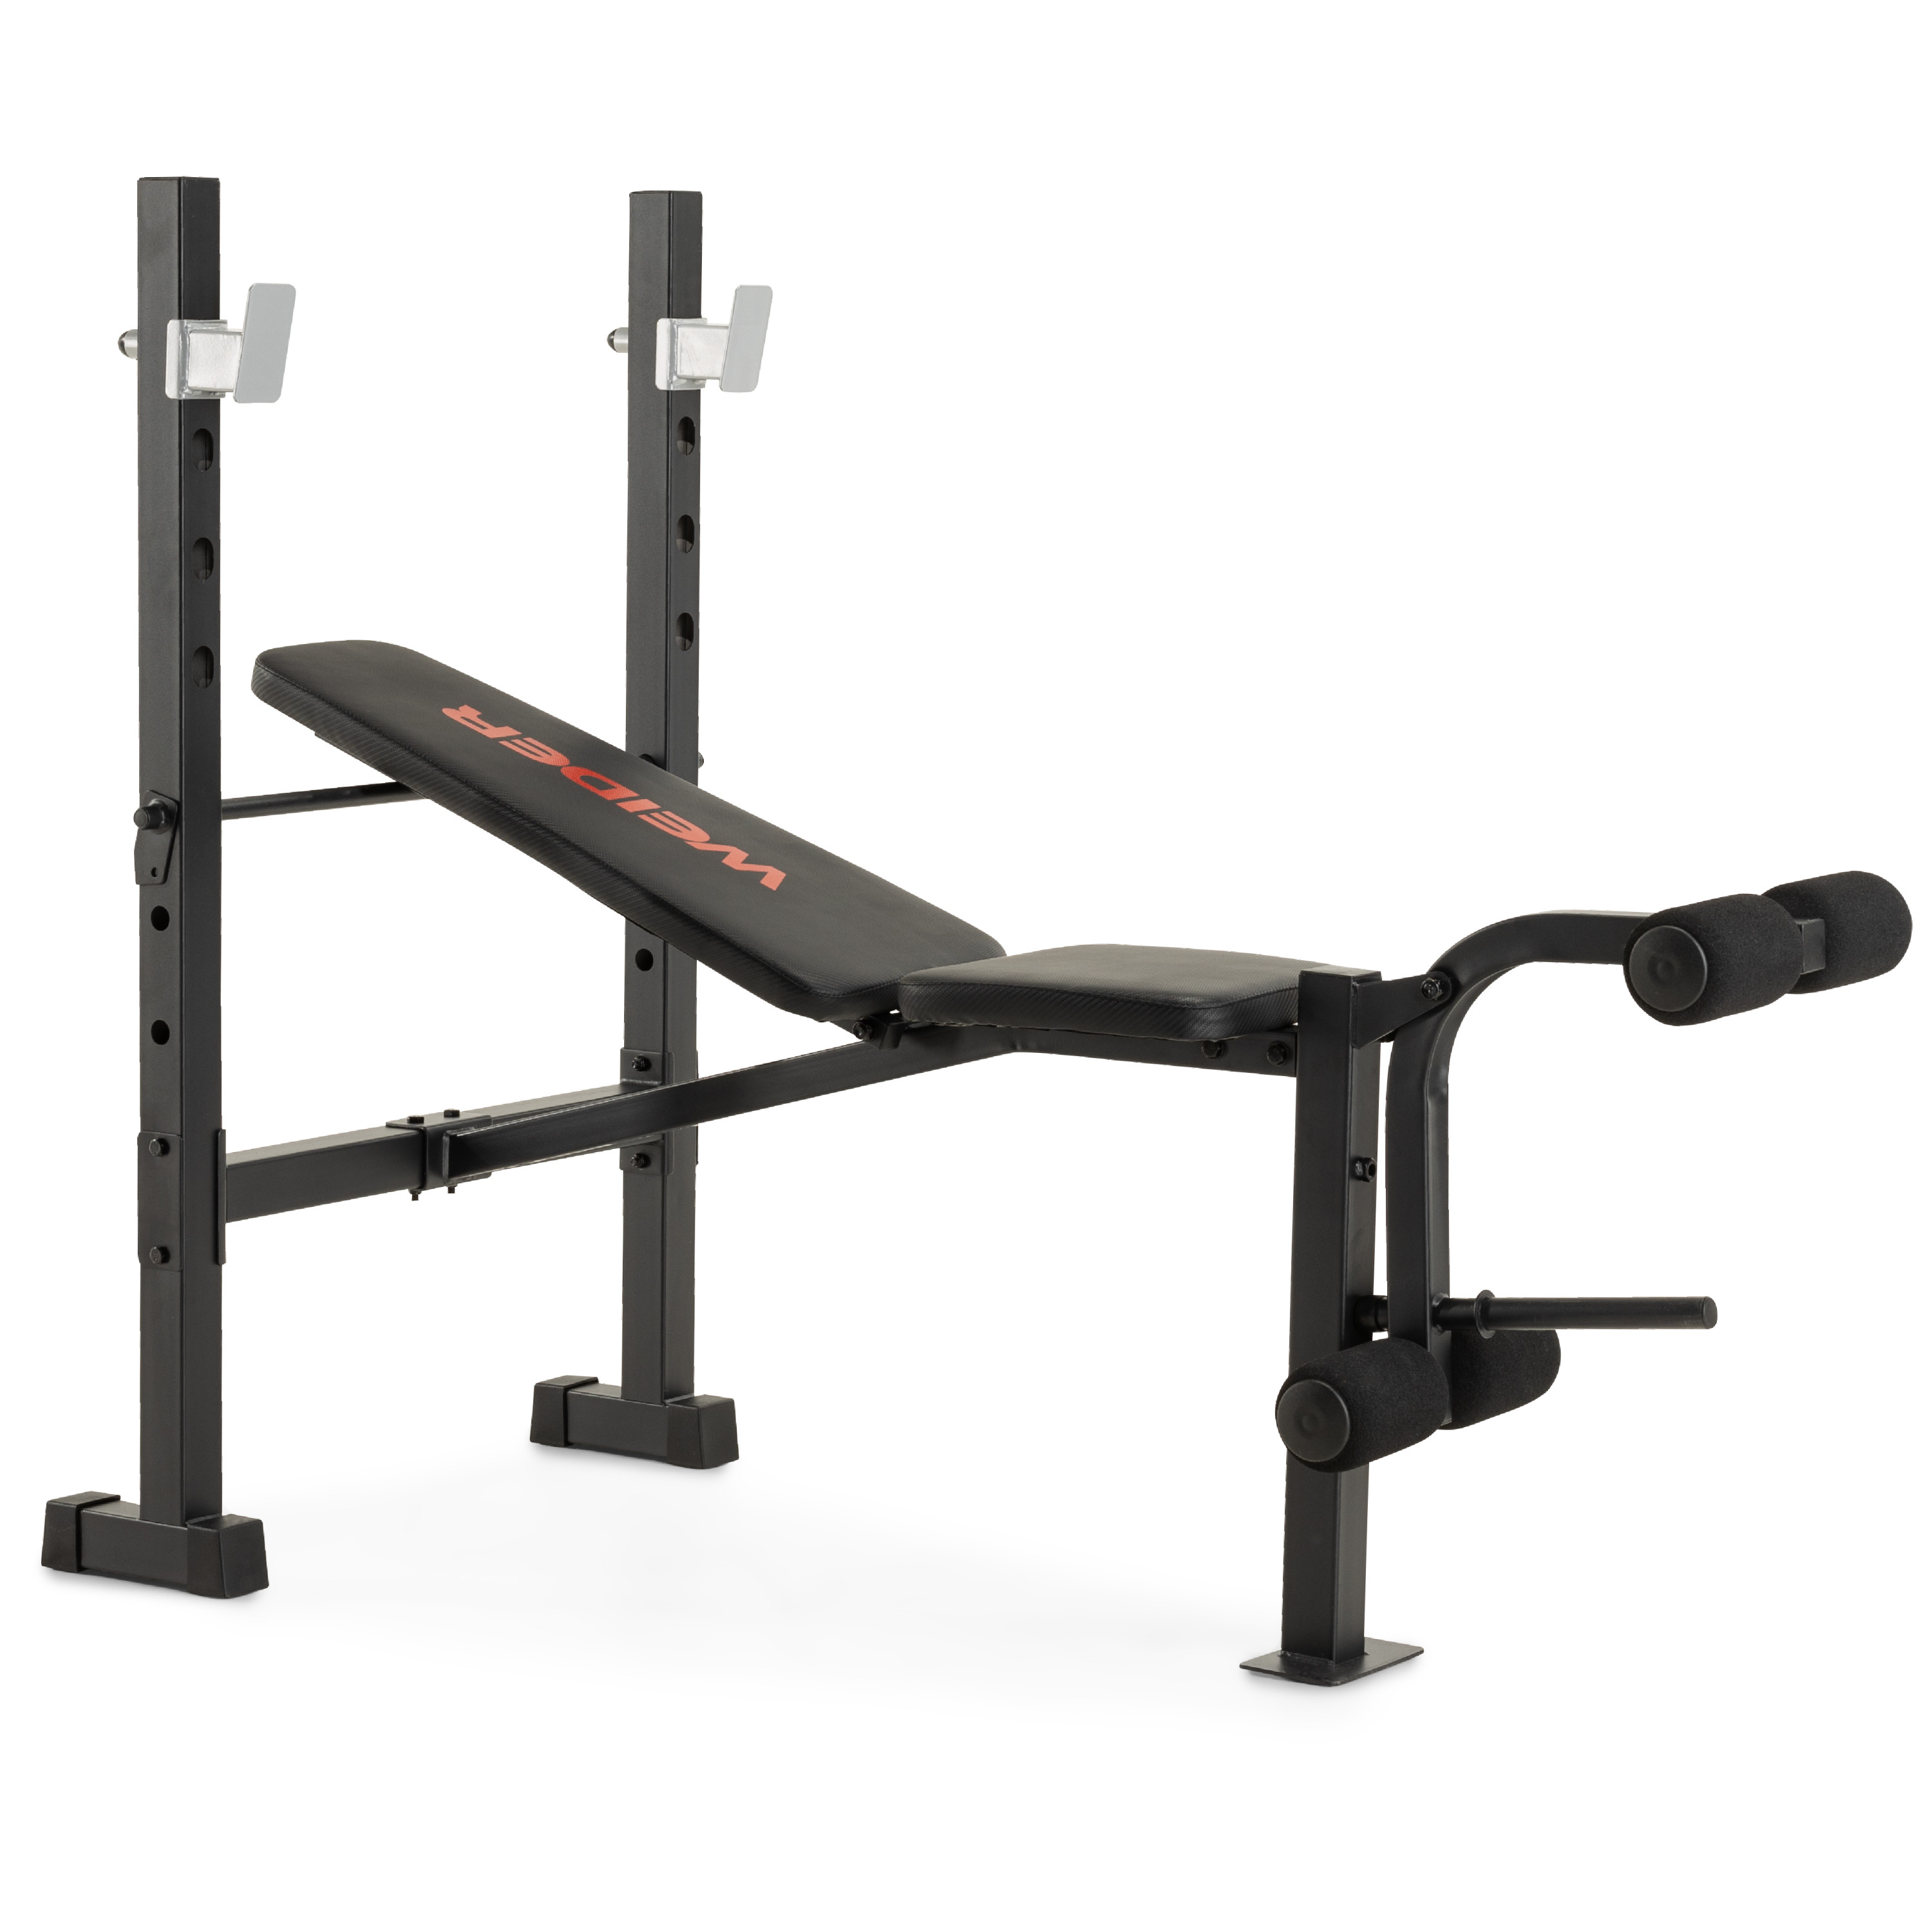 Weider Legacy Standard Bench and Rack, 410 Lb. Total Weight Capacity - image 1 of 23